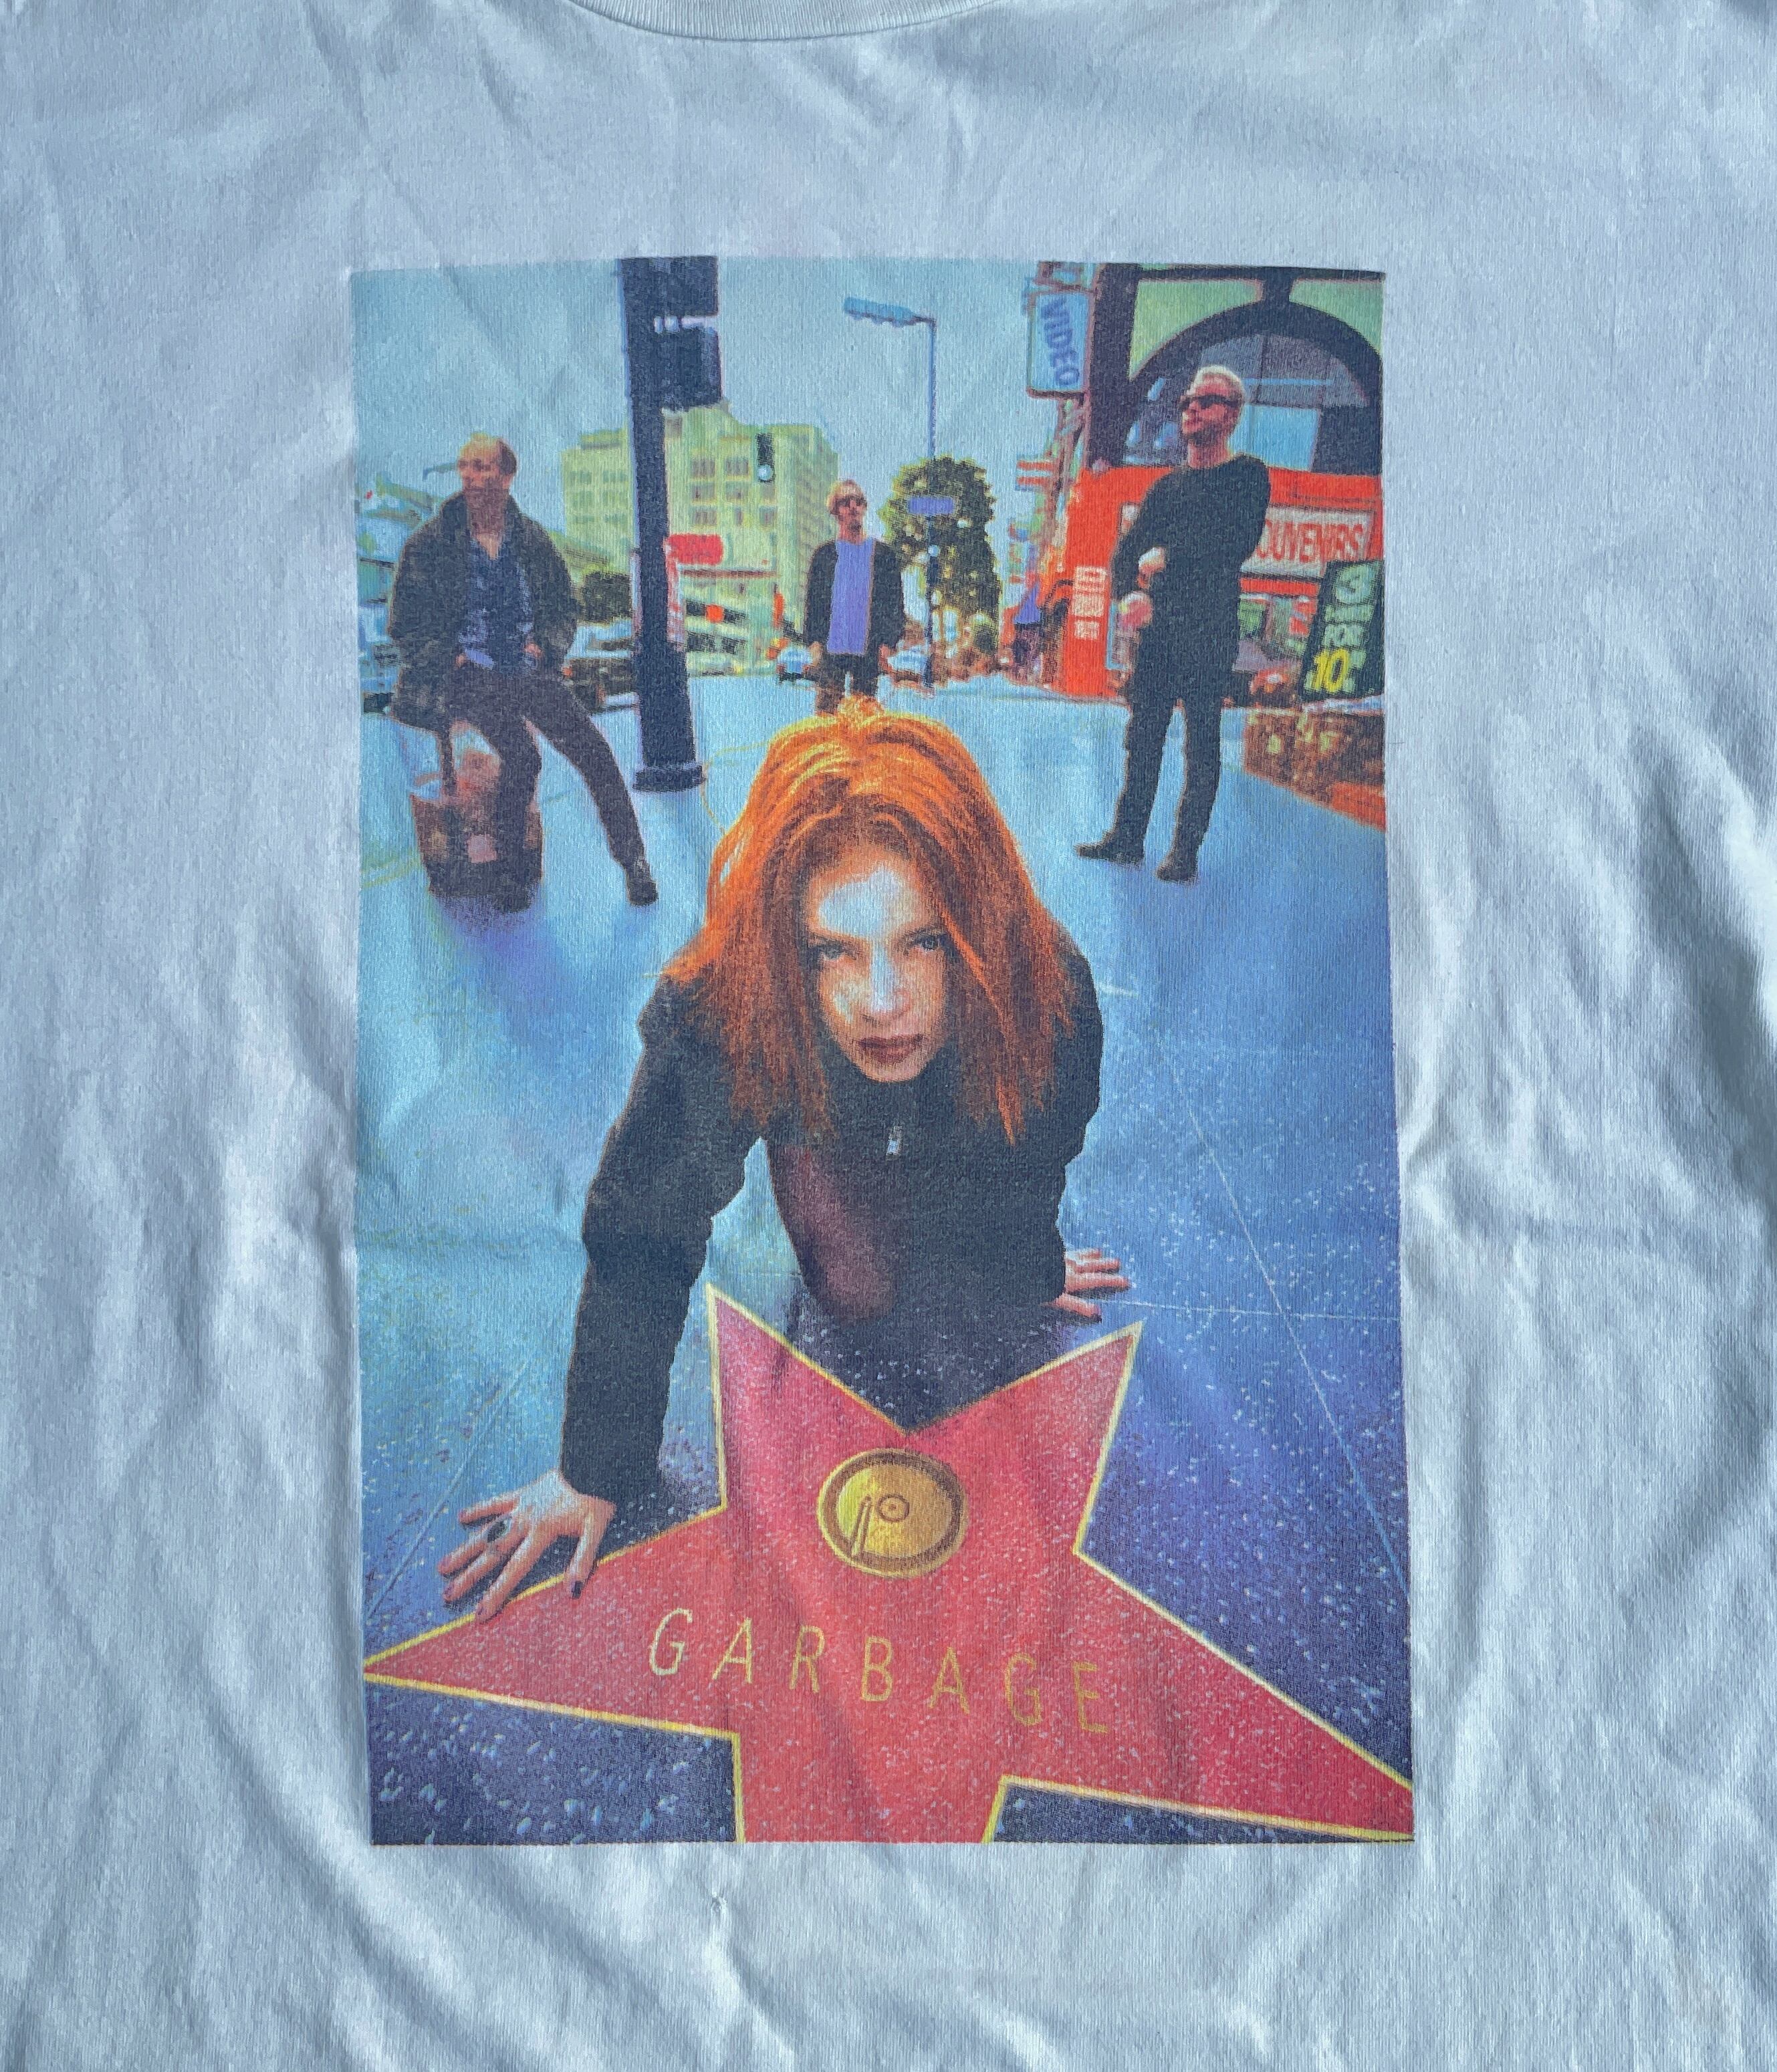 Vintage 90s Rock band T-shirt -Garbage- | BEGGARS BANQUET公式通販サイト 古着・ヴィンテージ